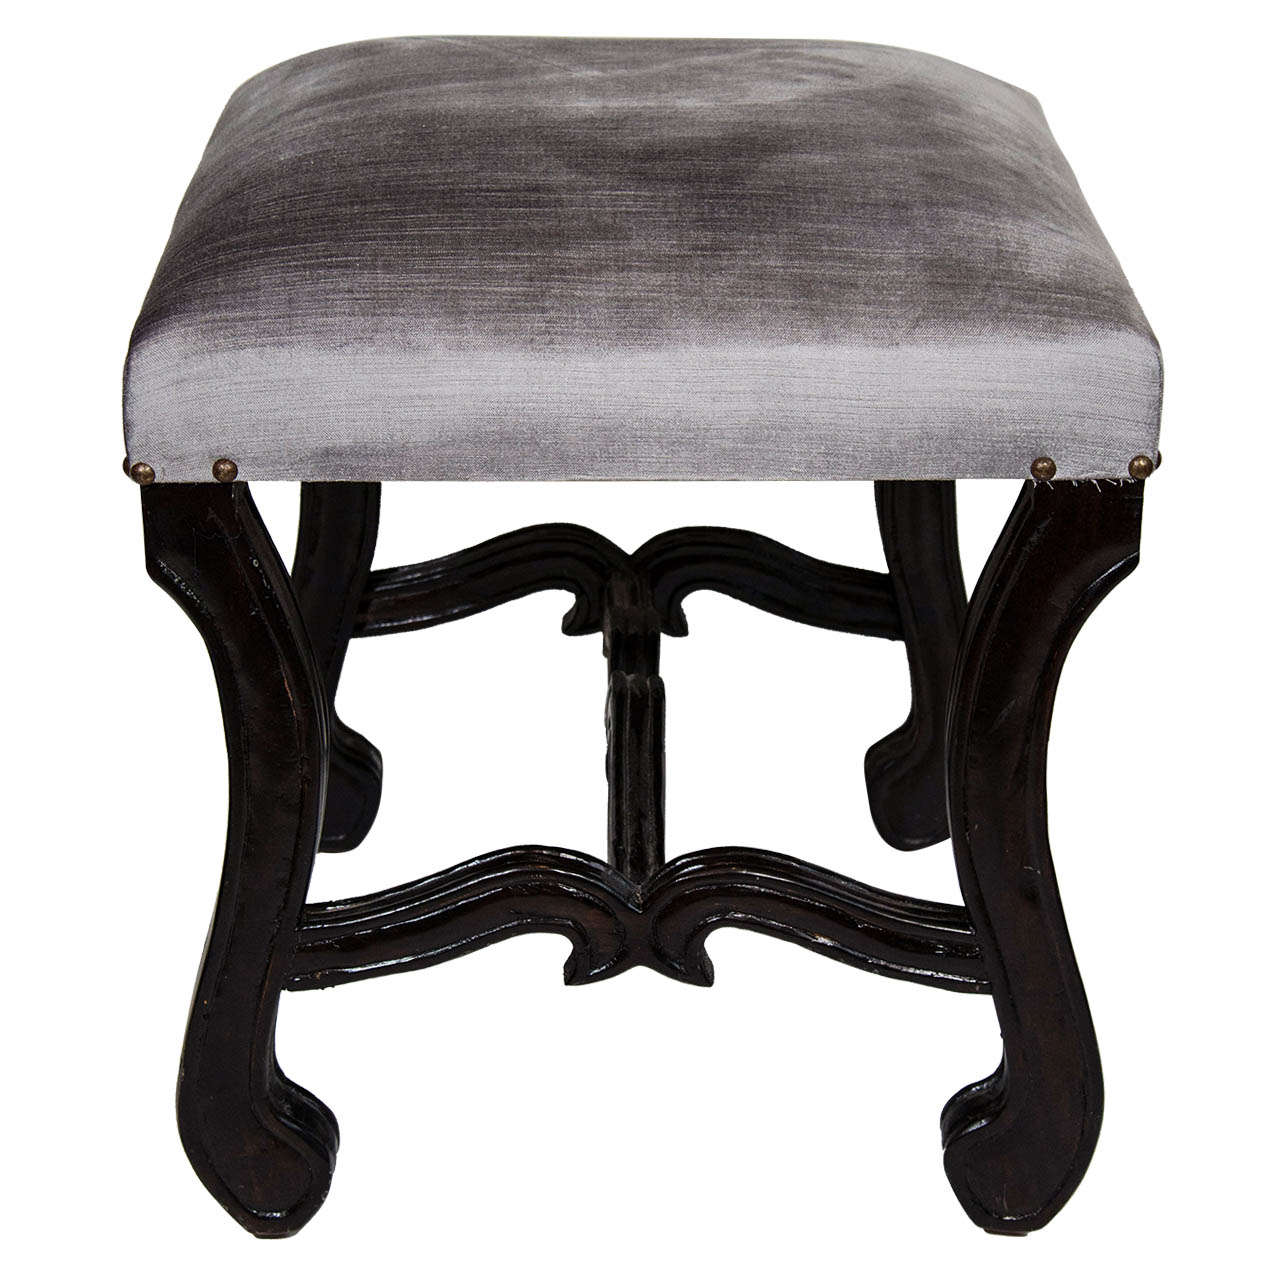 Elegant mid-century vanity stool with hand-carved walnut wood base in ebonized finish. Newly upholstered in luxe grey velvet with antique brass stud details. The bench features scrolled cabriole leg design and stylized cross stretcher with carved